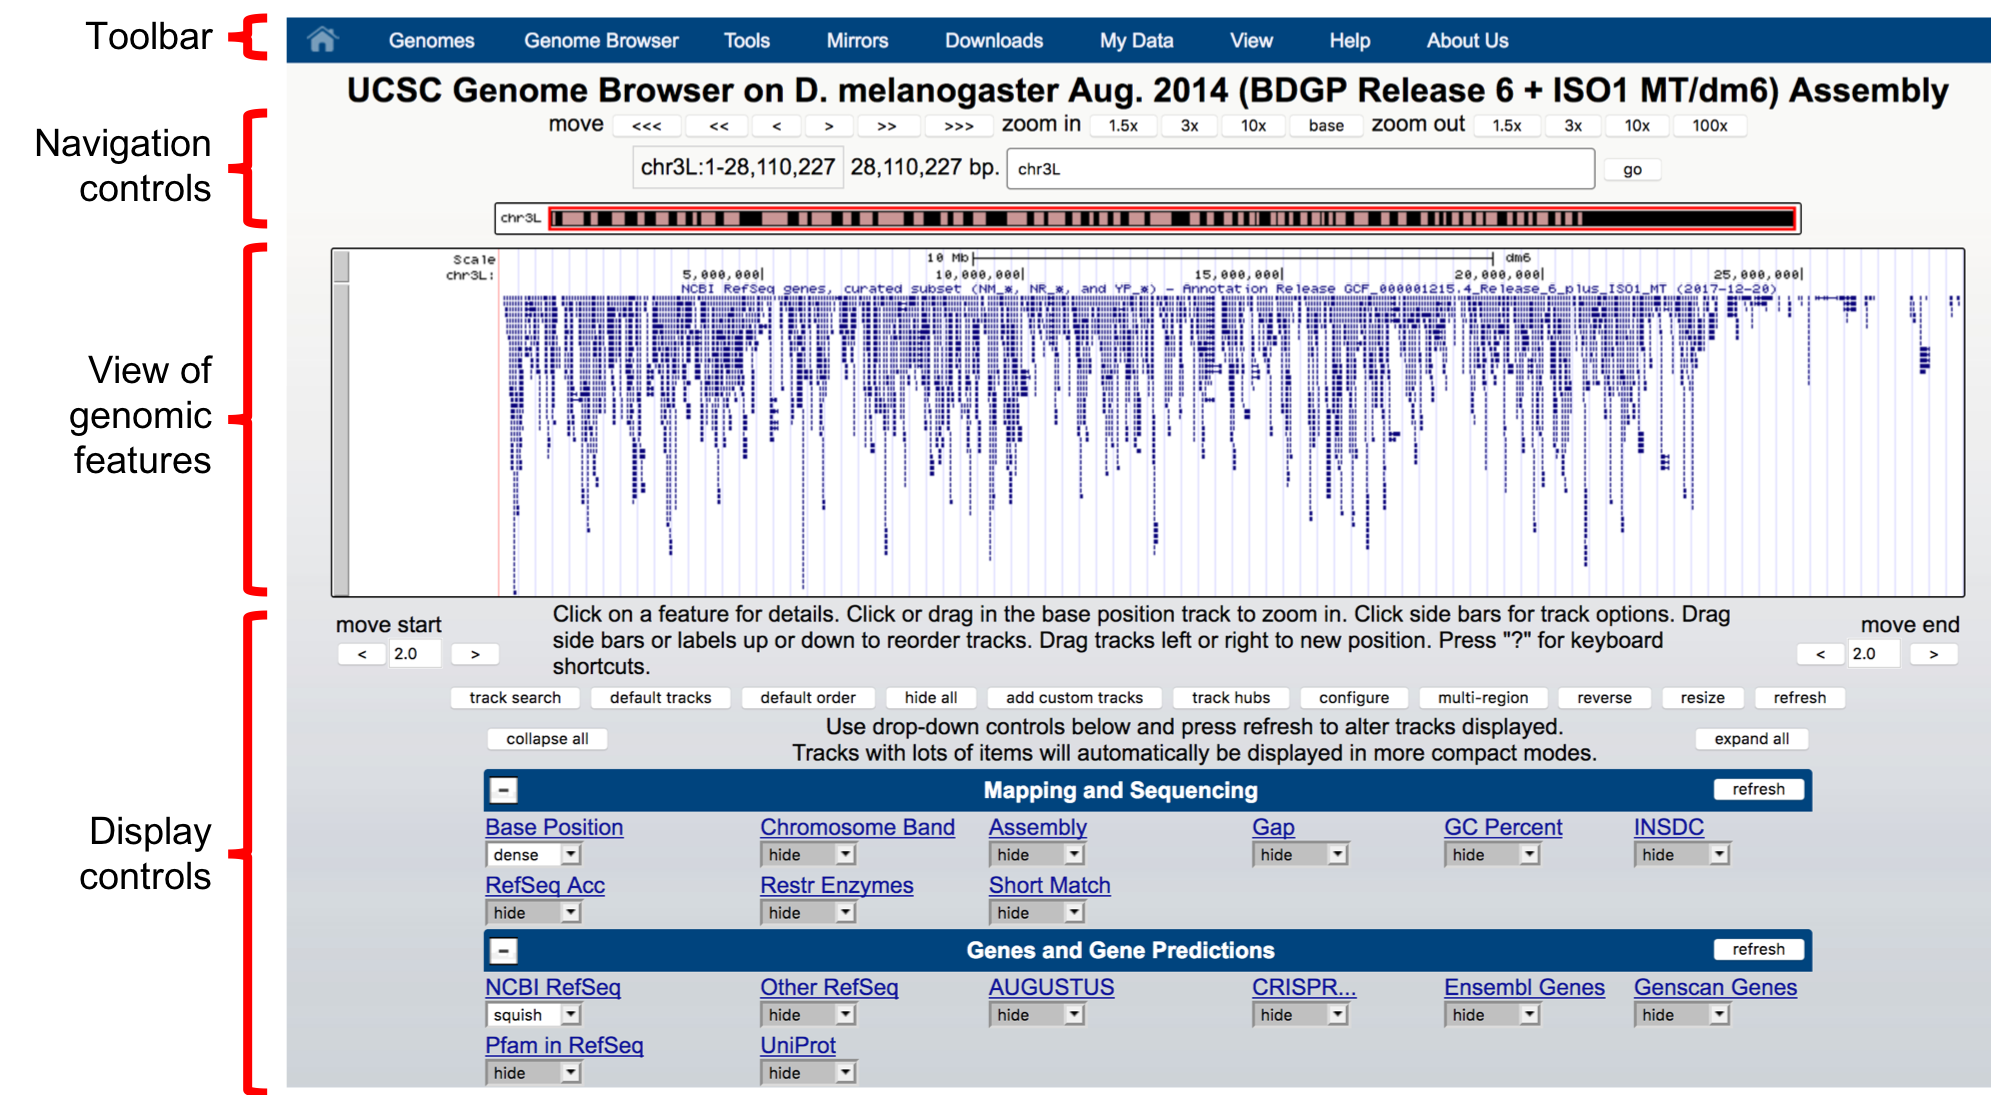 Major setions of the Genome Browser